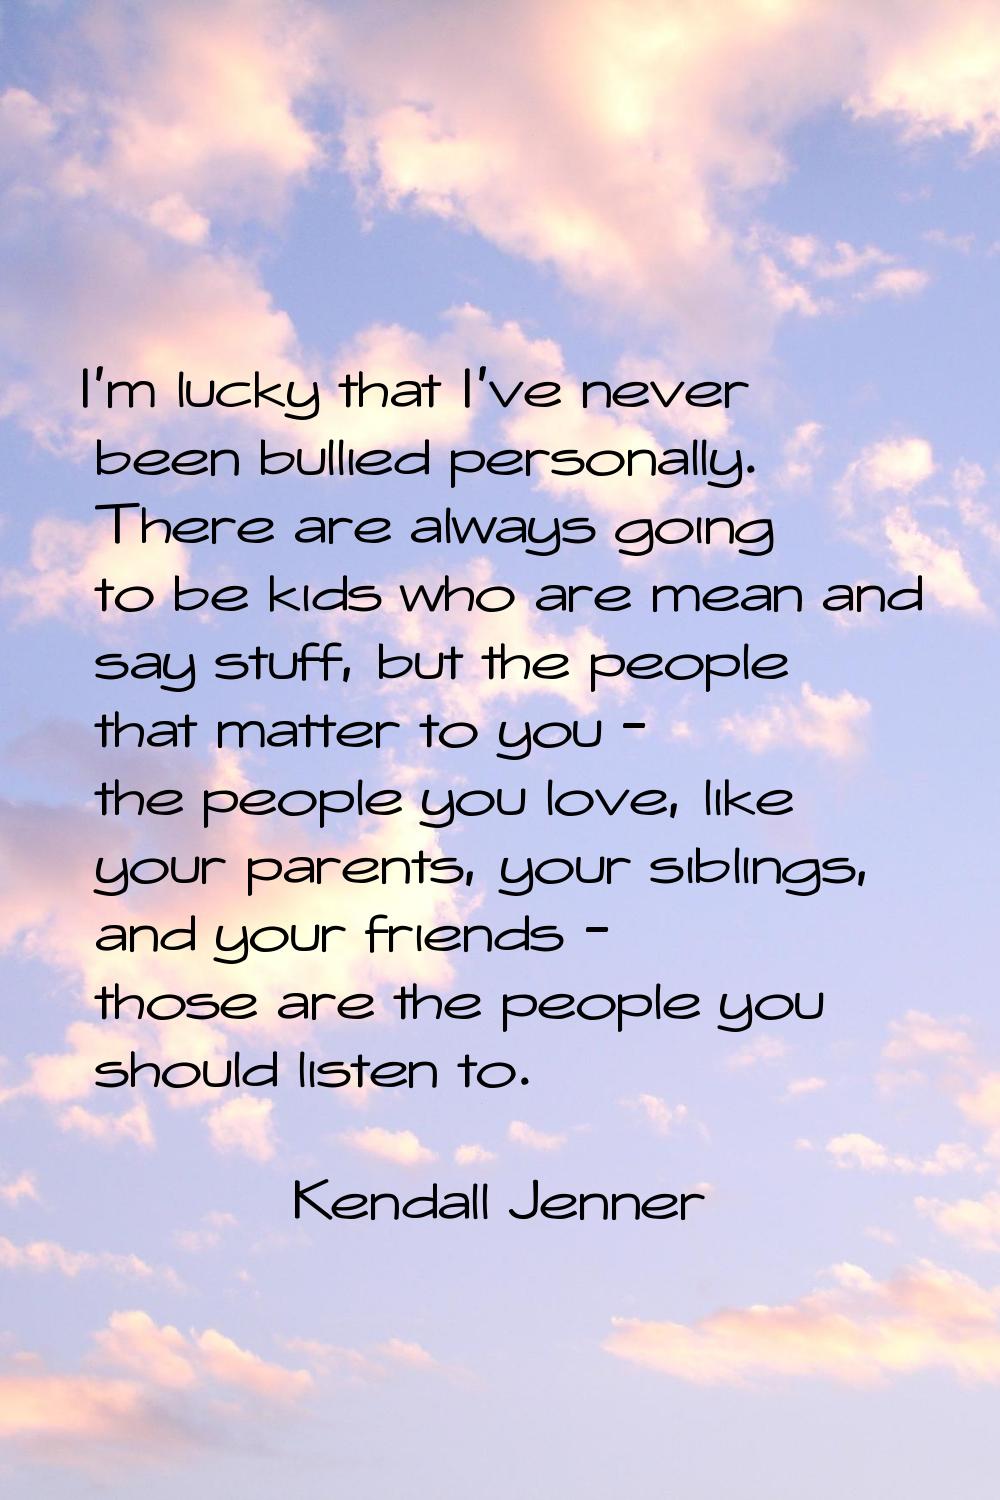 I'm lucky that I've never been bullied personally. There are always going to be kids who are mean a